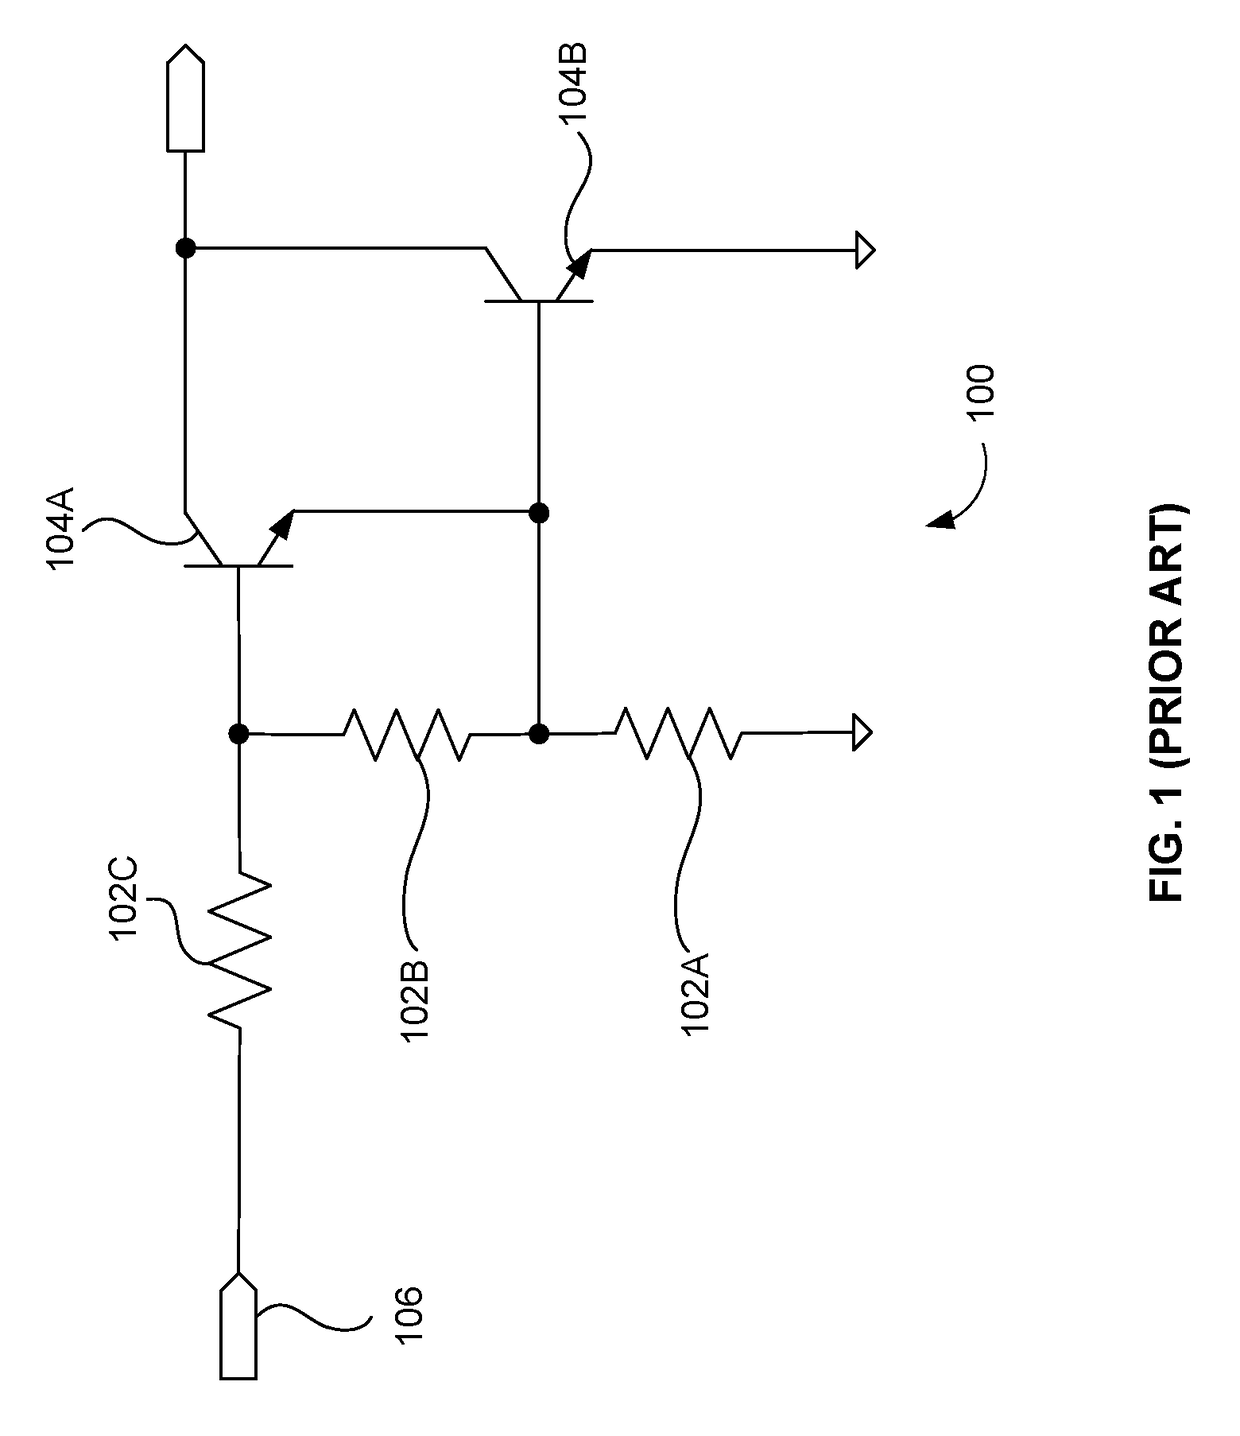 Configuration of JFET for base drive bipolar junction transistor with automatic compensation of beta variation